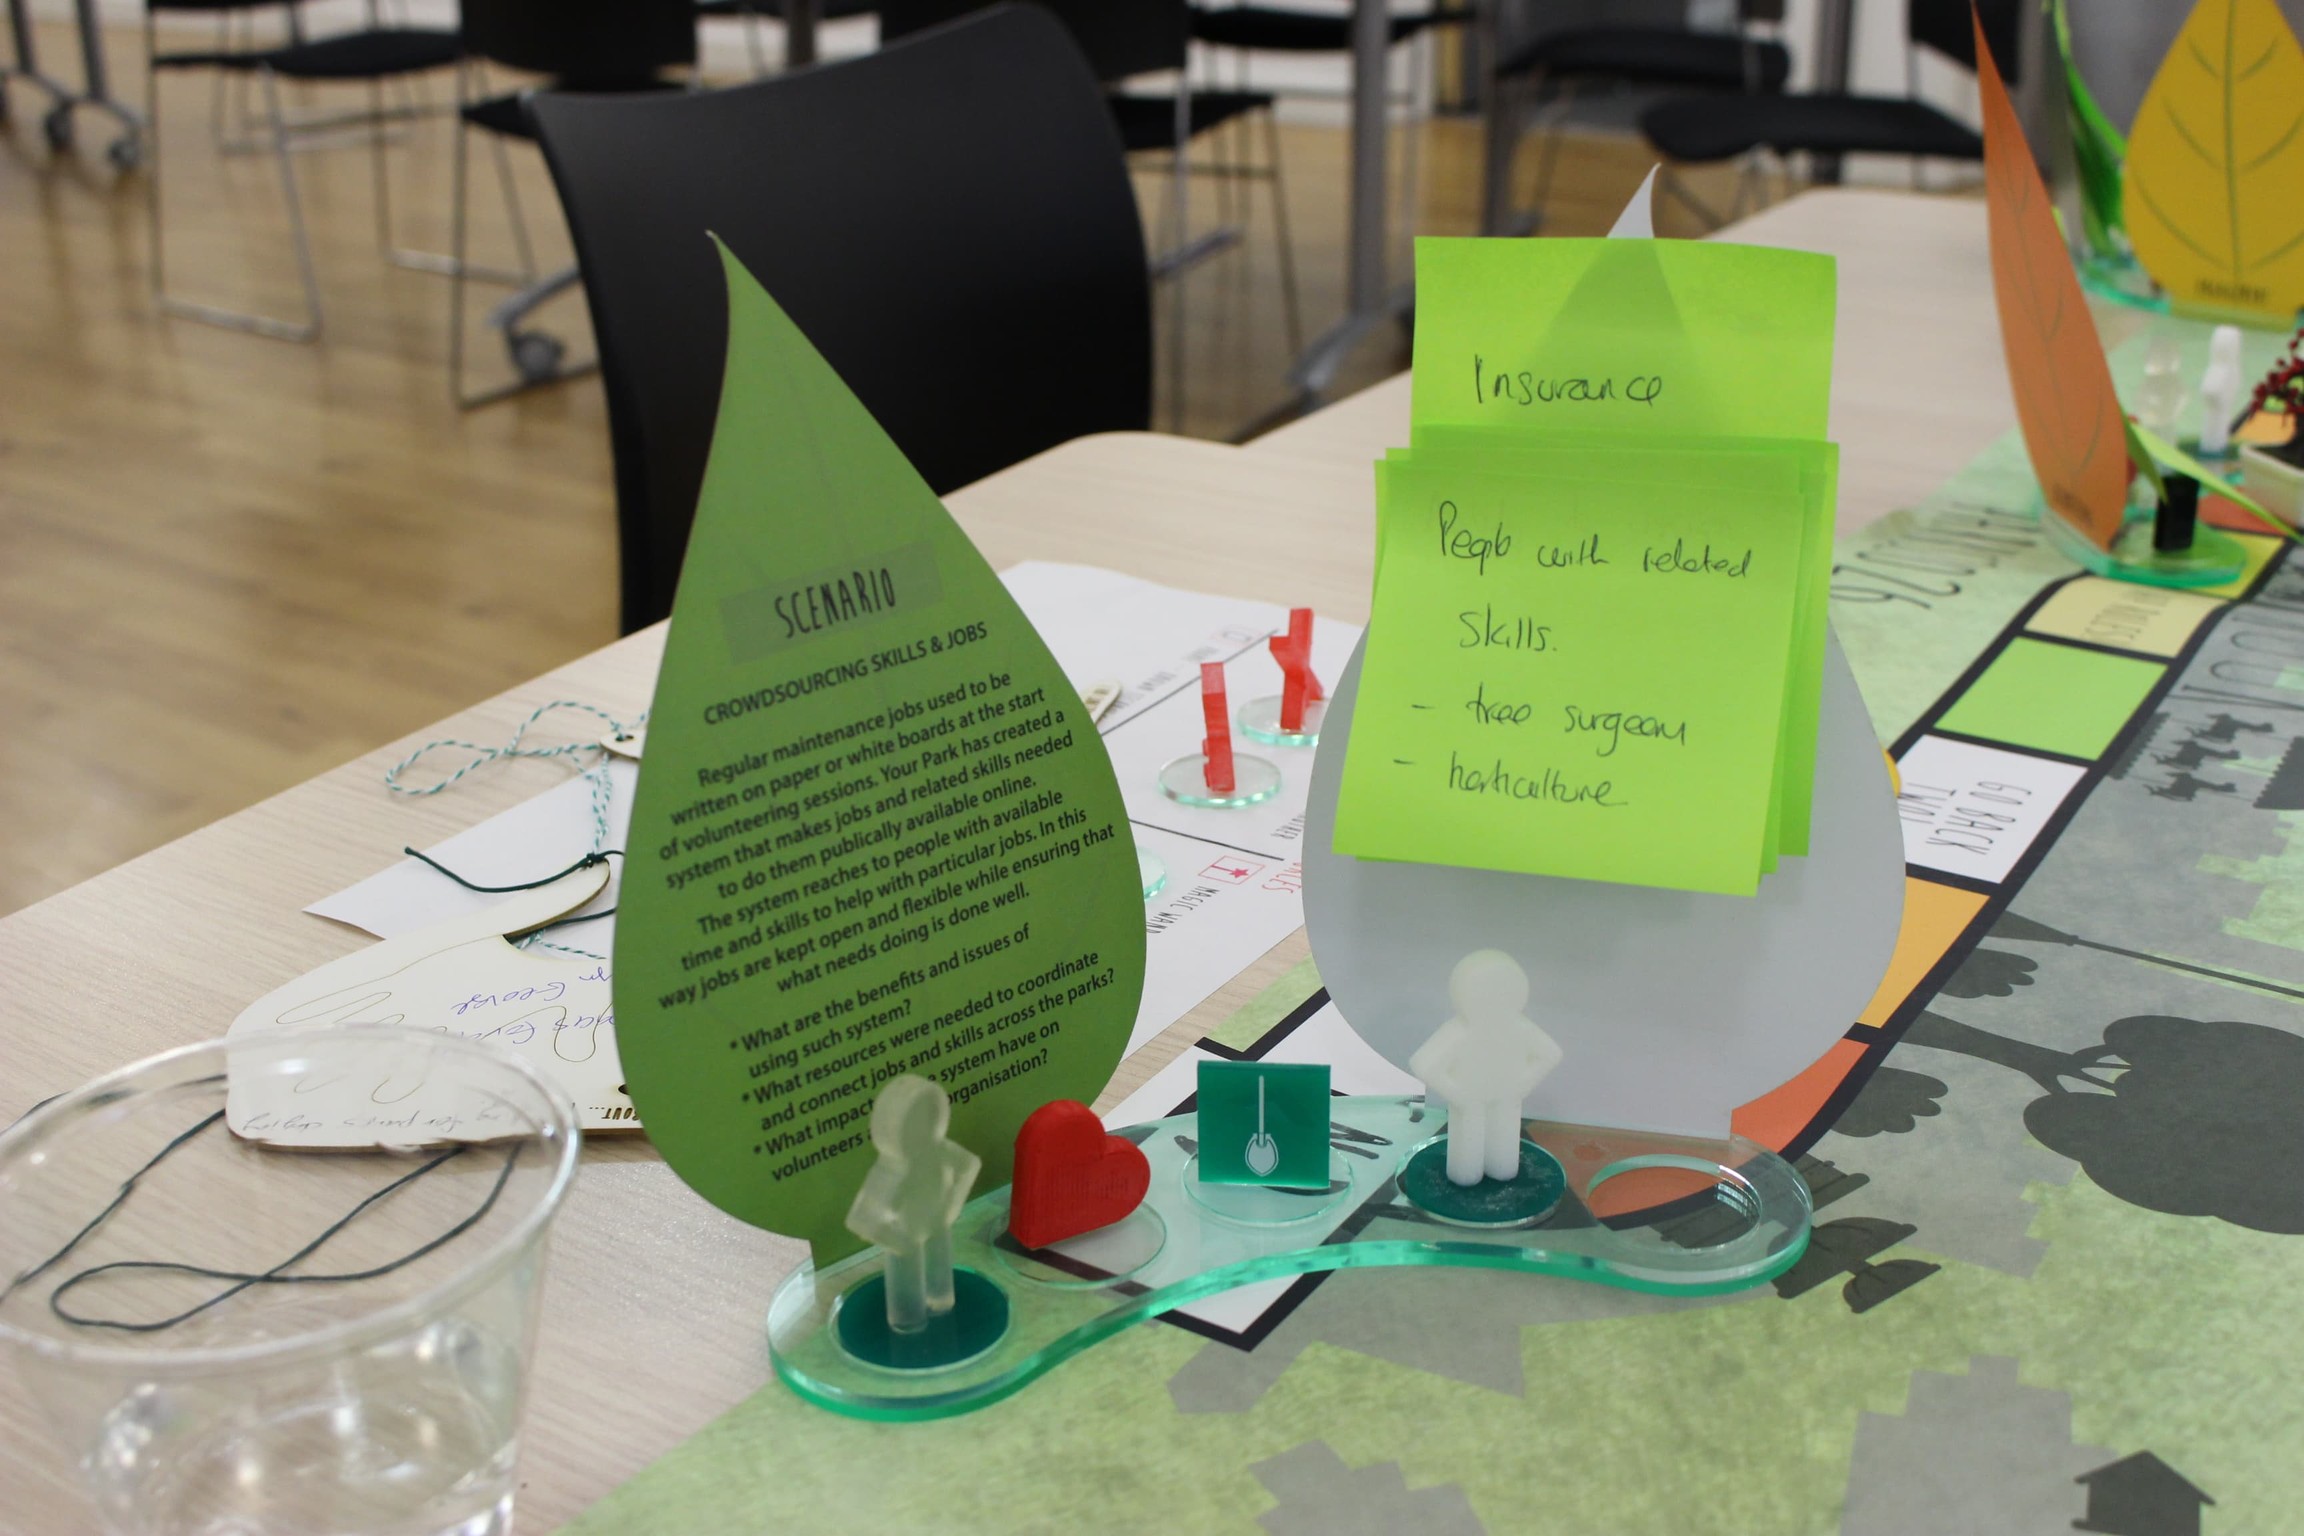 The workshops used a bespoke board game style process so people could share ideas about the future of the parks